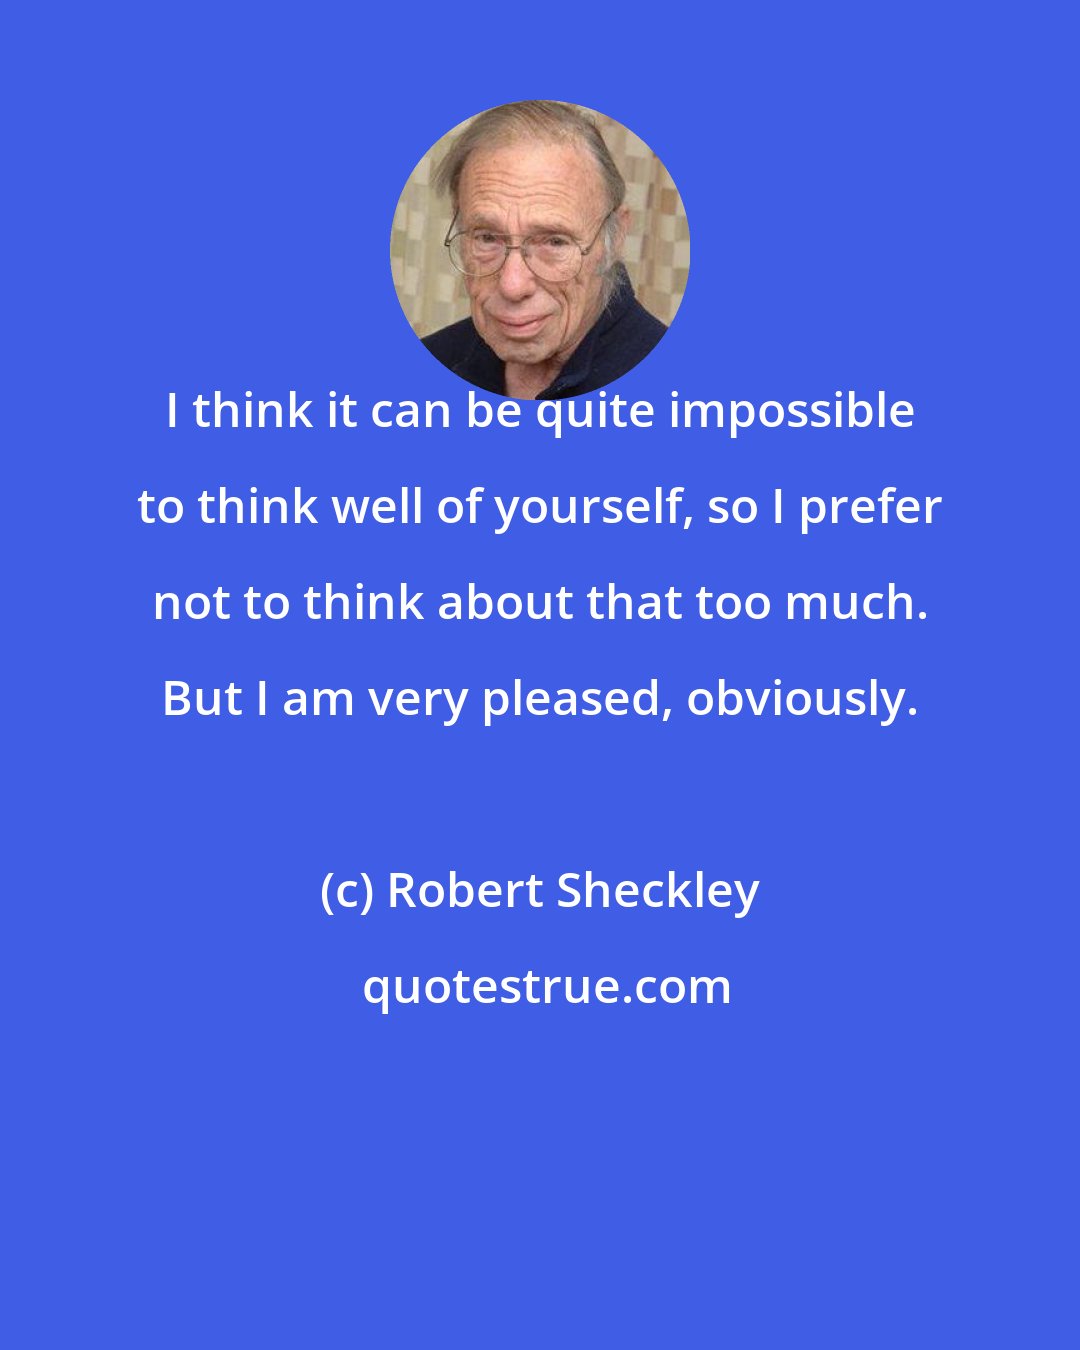 Robert Sheckley: I think it can be quite impossible to think well of yourself, so I prefer not to think about that too much. But I am very pleased, obviously.